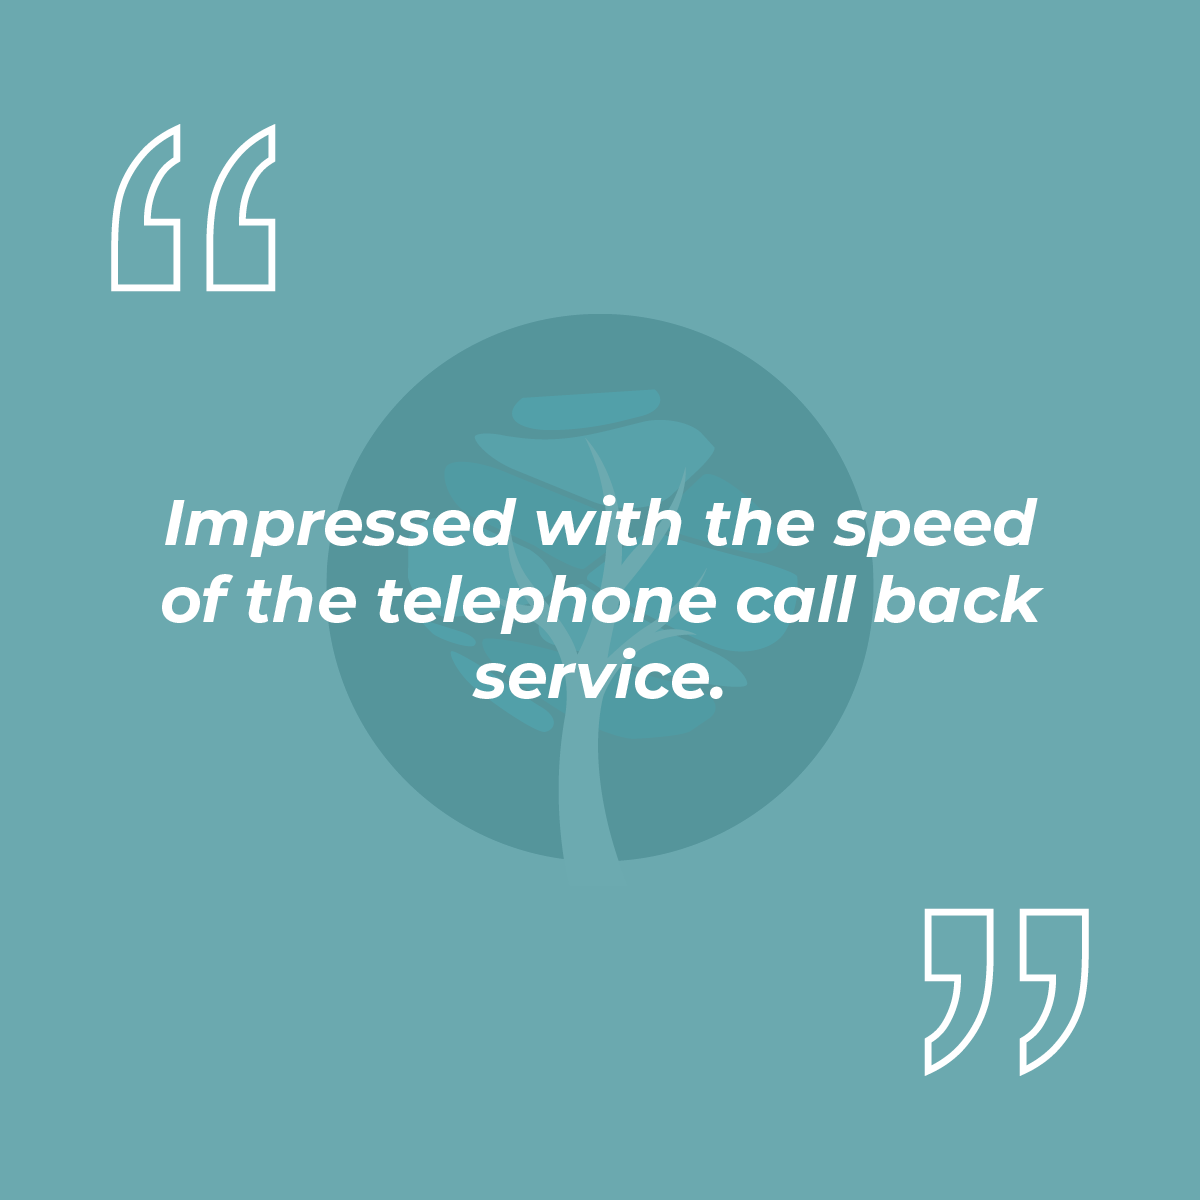 Impressed with the speed of the telephone call back service.